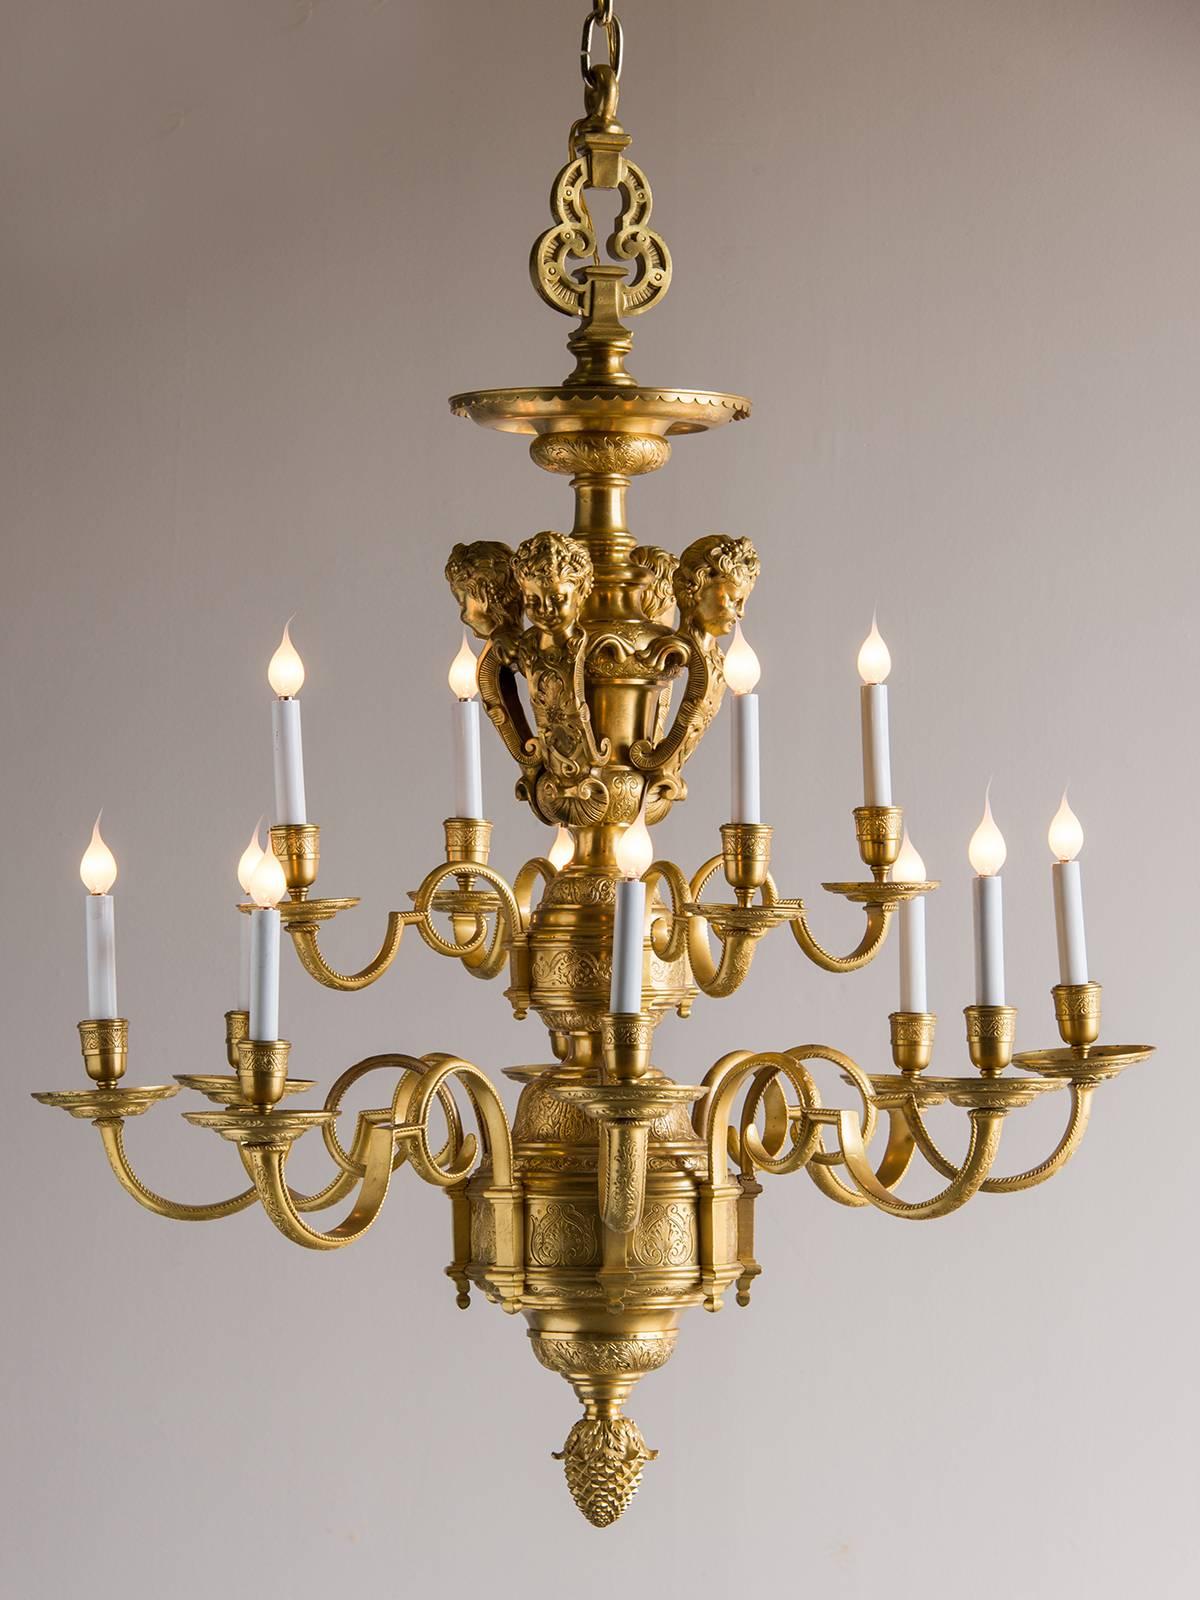 Receive our new selections direct from 1stdibs by email each week. Please click Follow Dealer below and see them first!

Vintage Louis XIV style solid bronze doré twelve-light chandelier, by Repute Juilliard School, New York, circa 1920. The